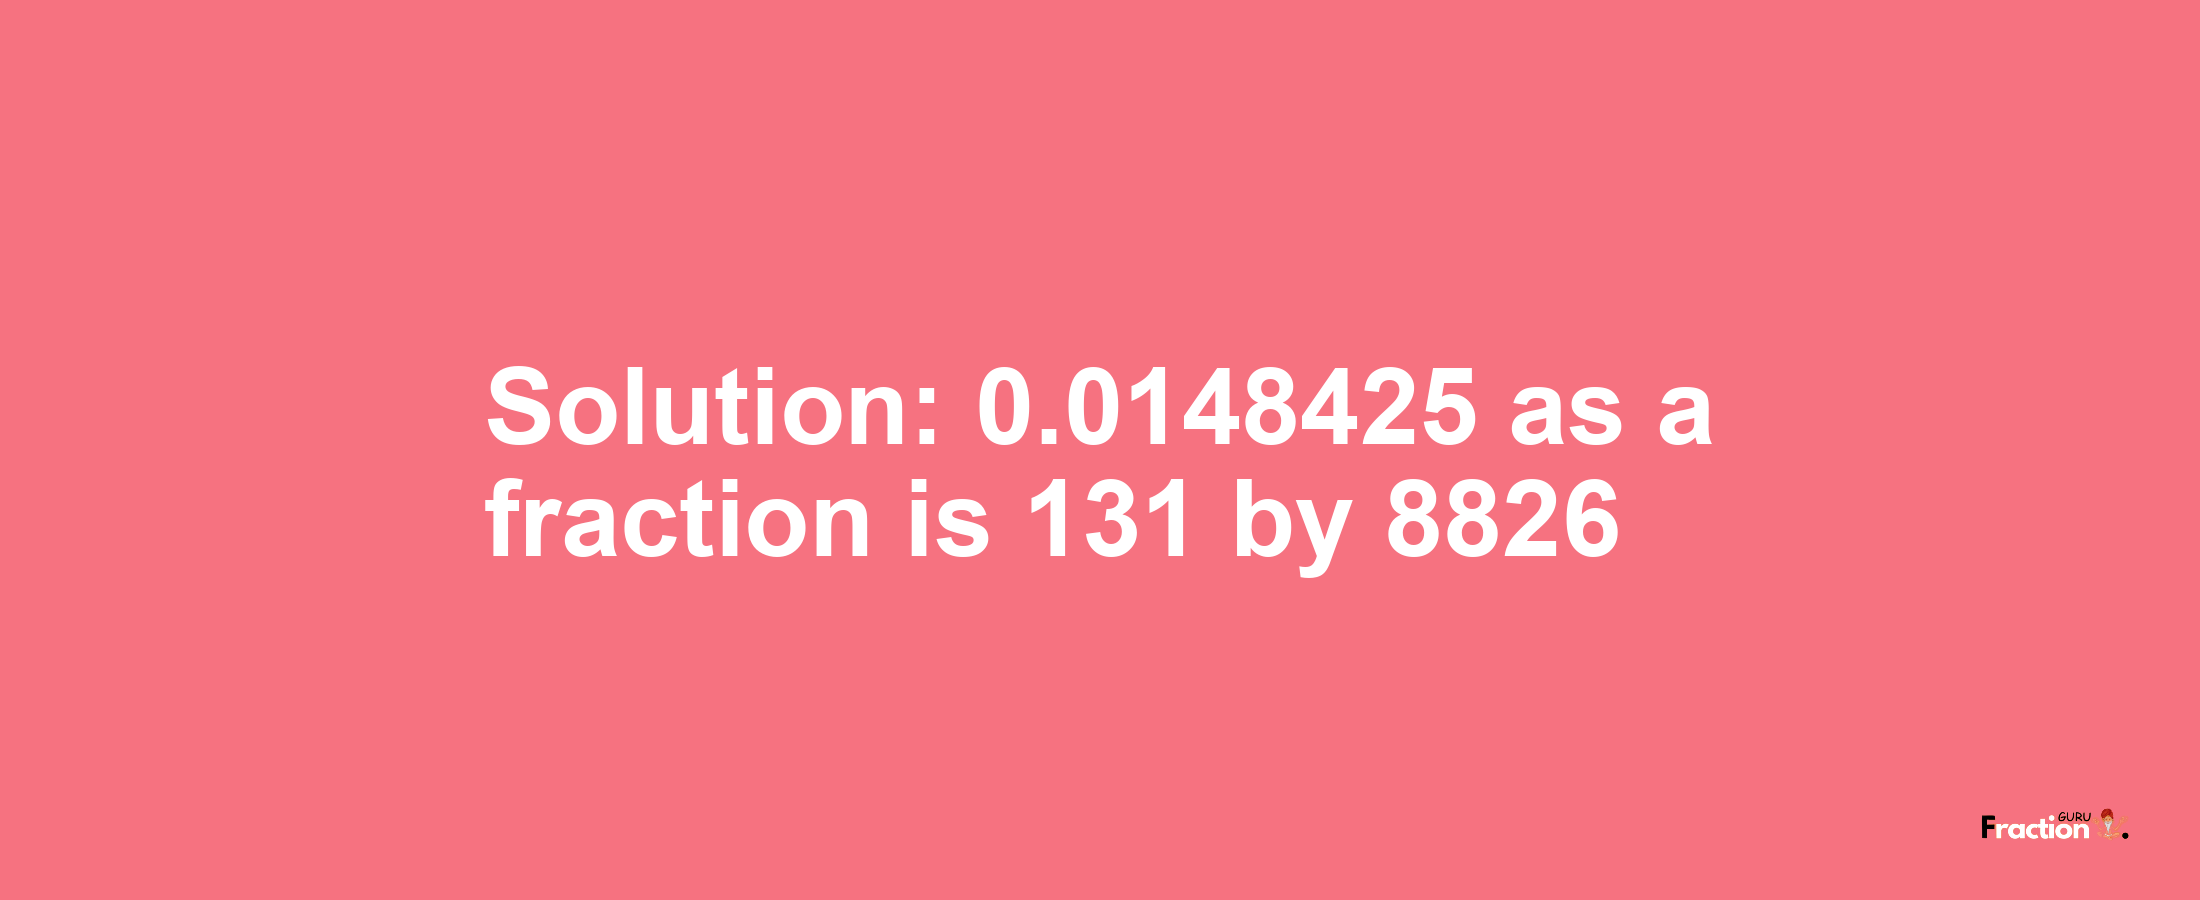 Solution:0.0148425 as a fraction is 131/8826